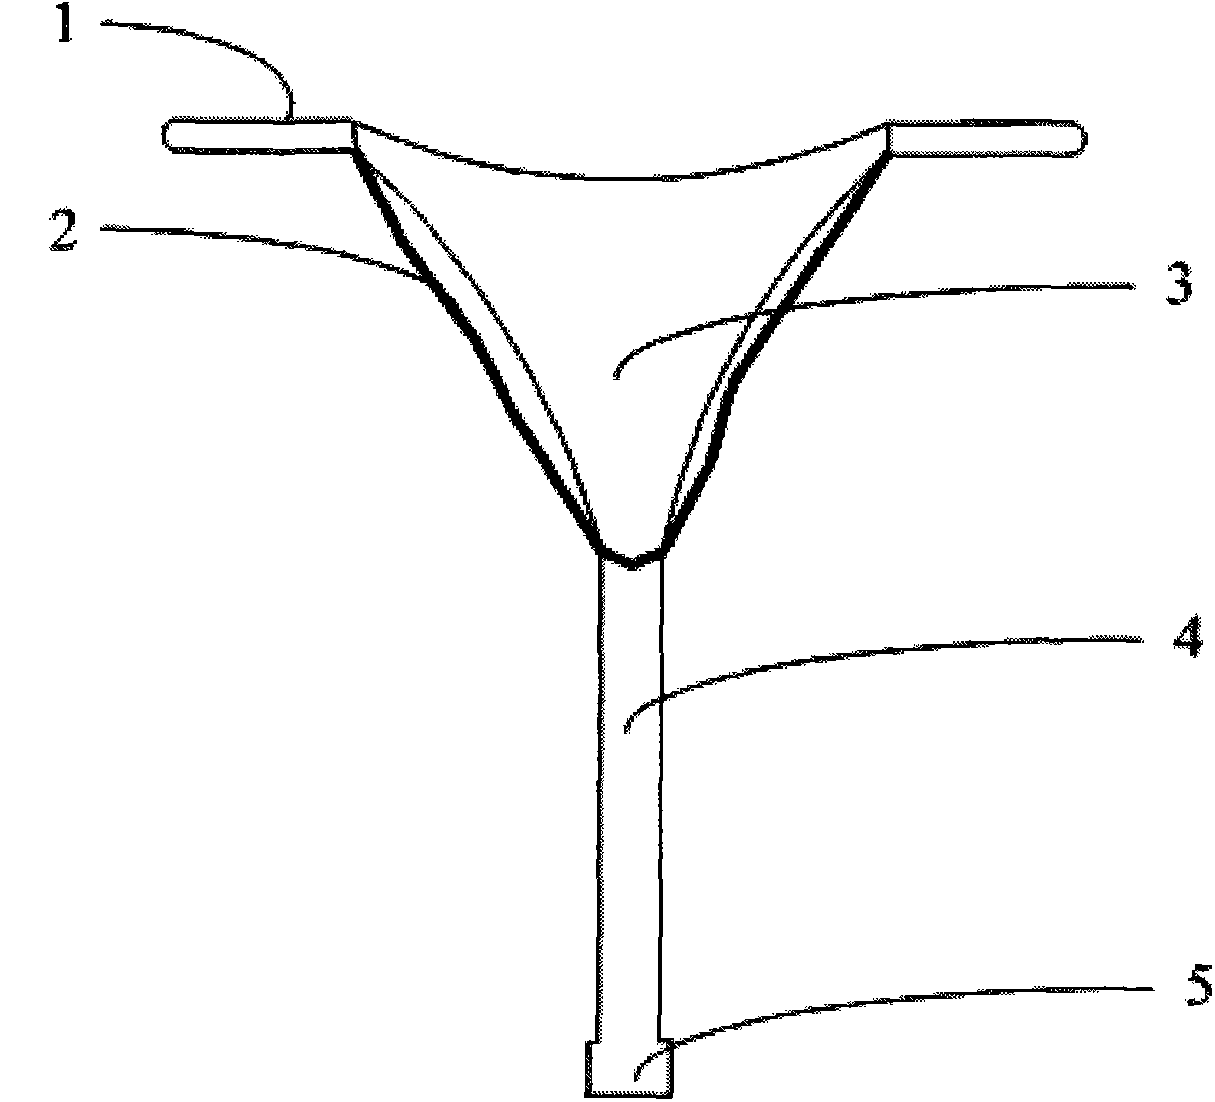 Intrauterine adhesion prevention and treatment device